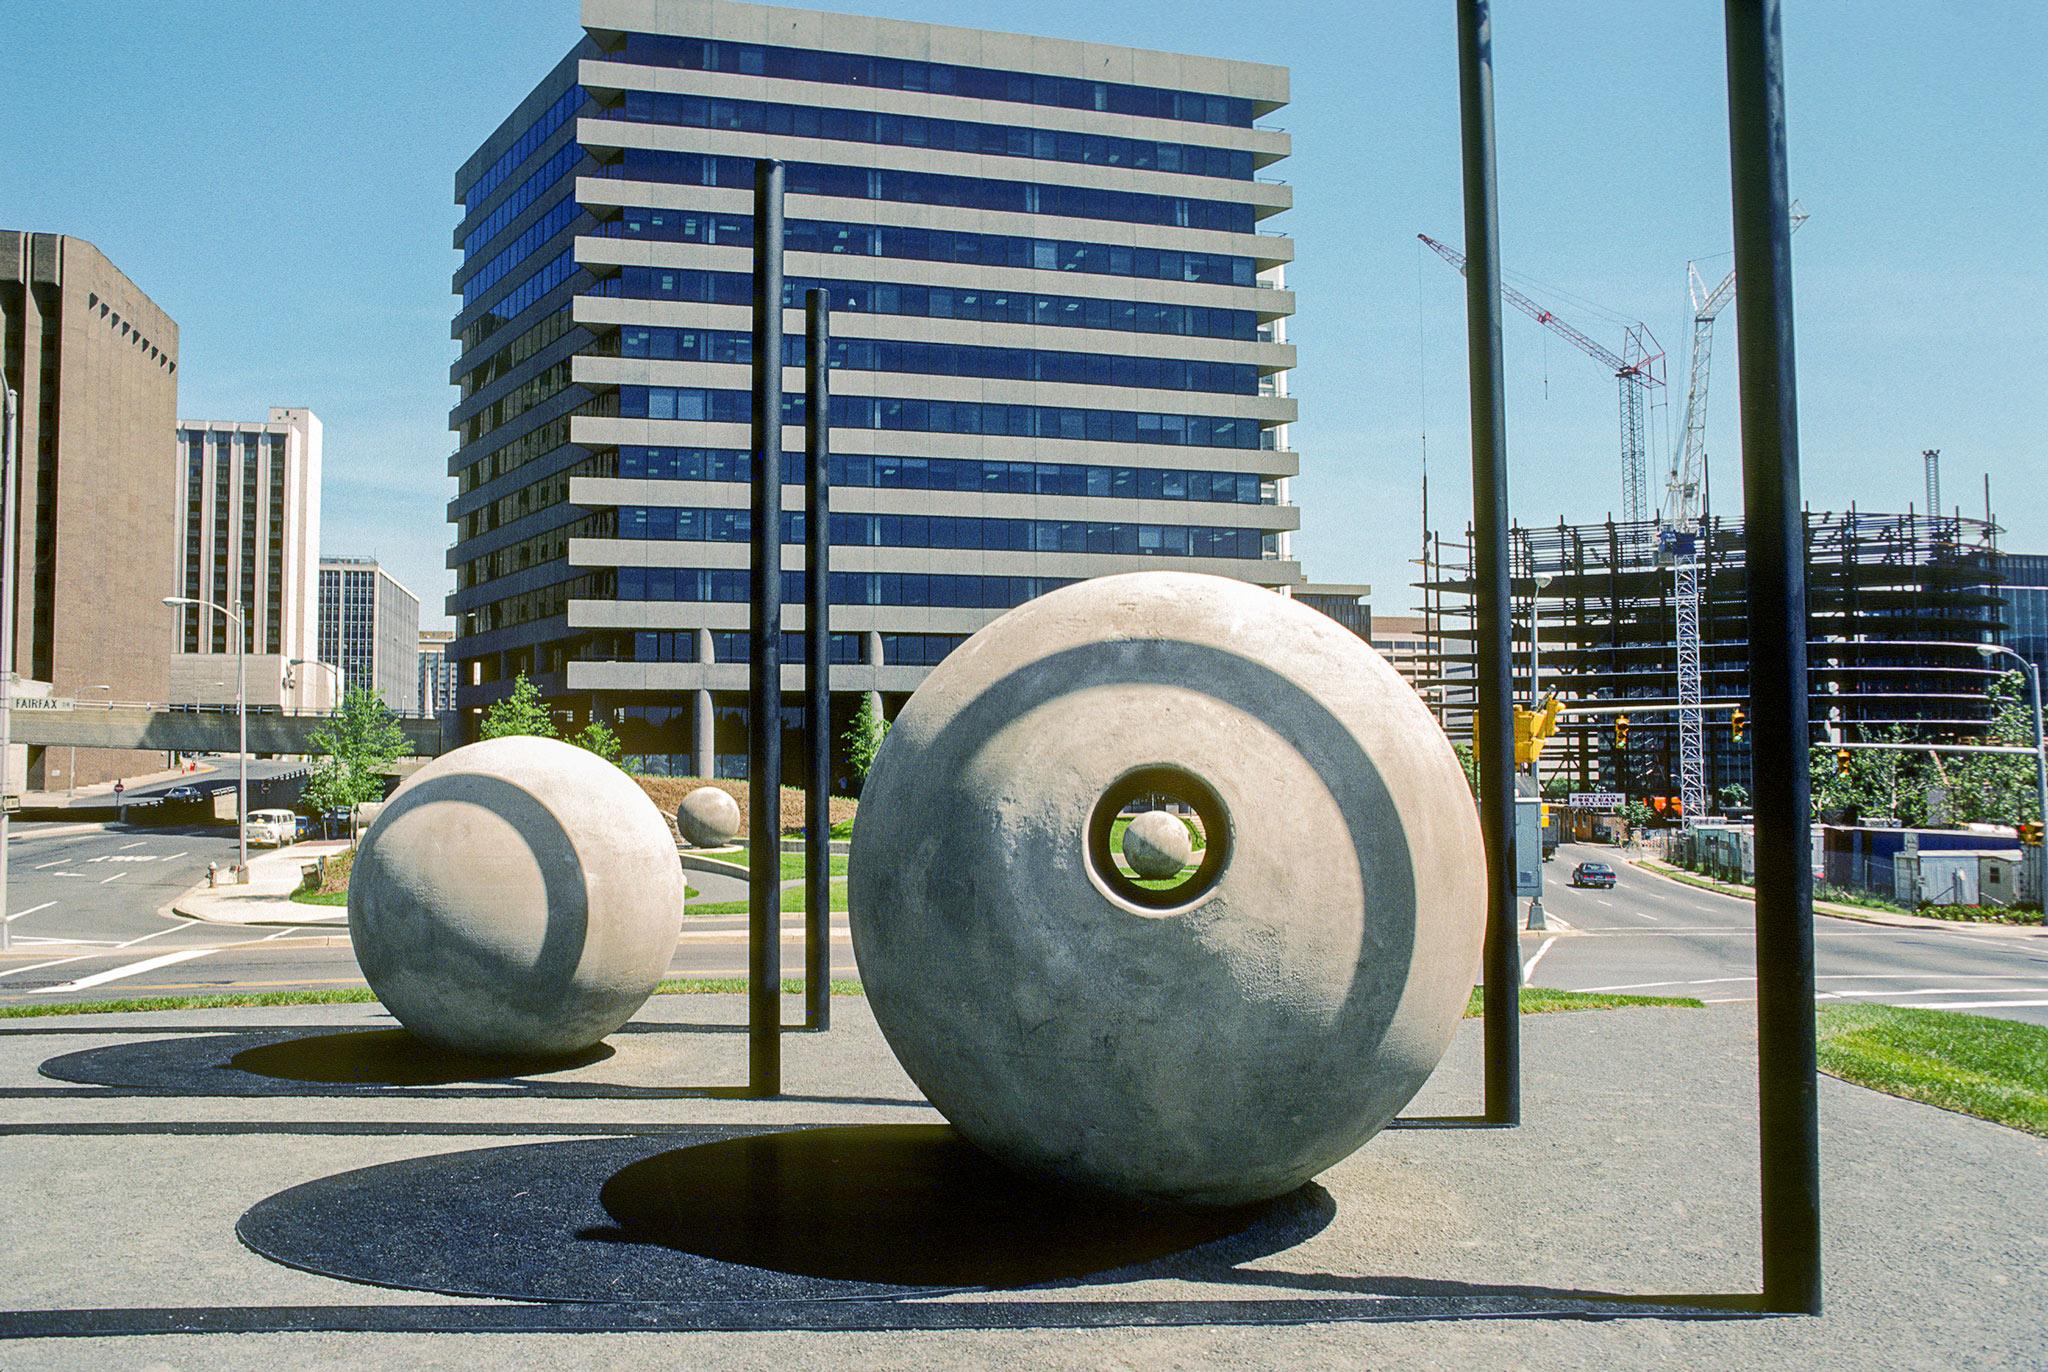 large concrete spheres in a park with a small tunnel through one of the spheres